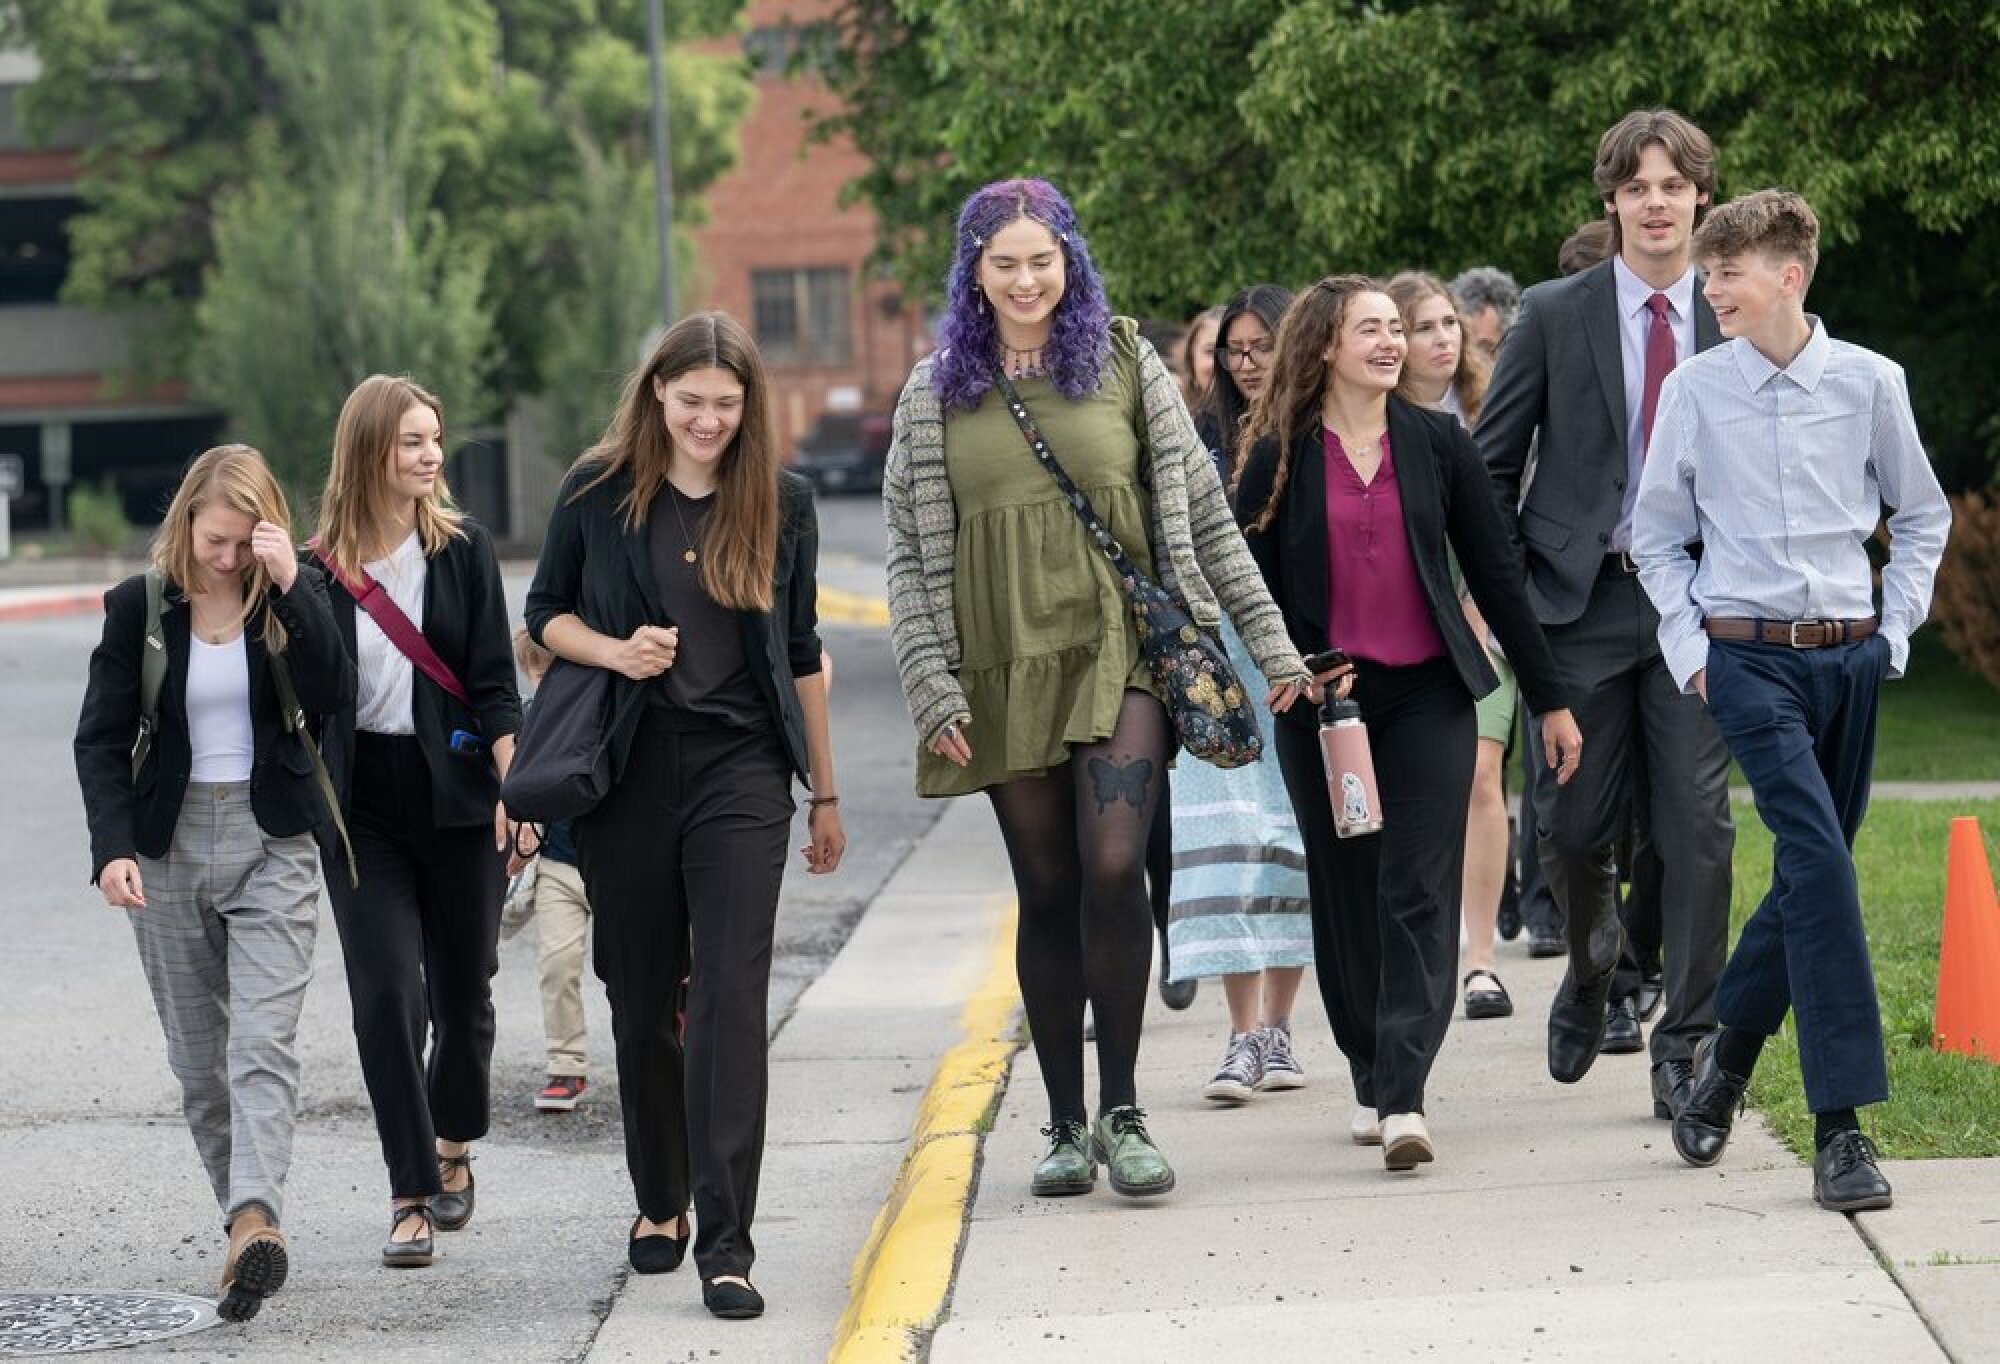 A large group of youth plaintiffs walk down a street.